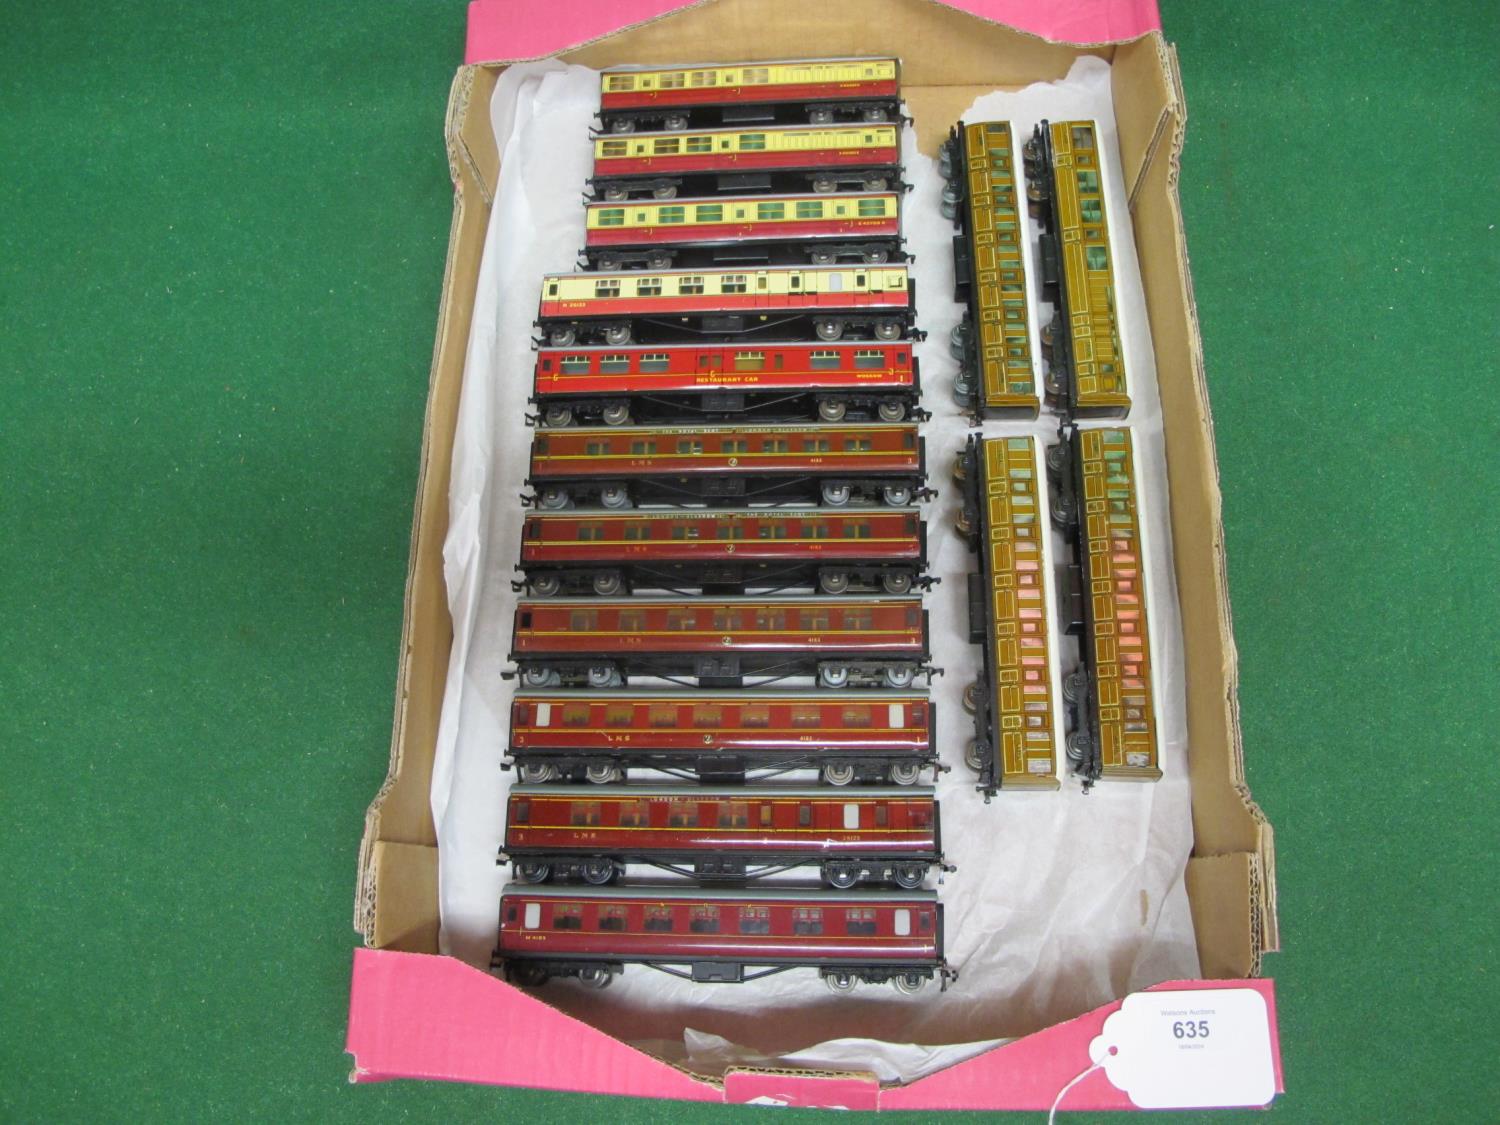 Fifteen Hornby Dublo 3 Rail tinplate coaches for the LMS, BR and LNER (teak), unboxed (in clean